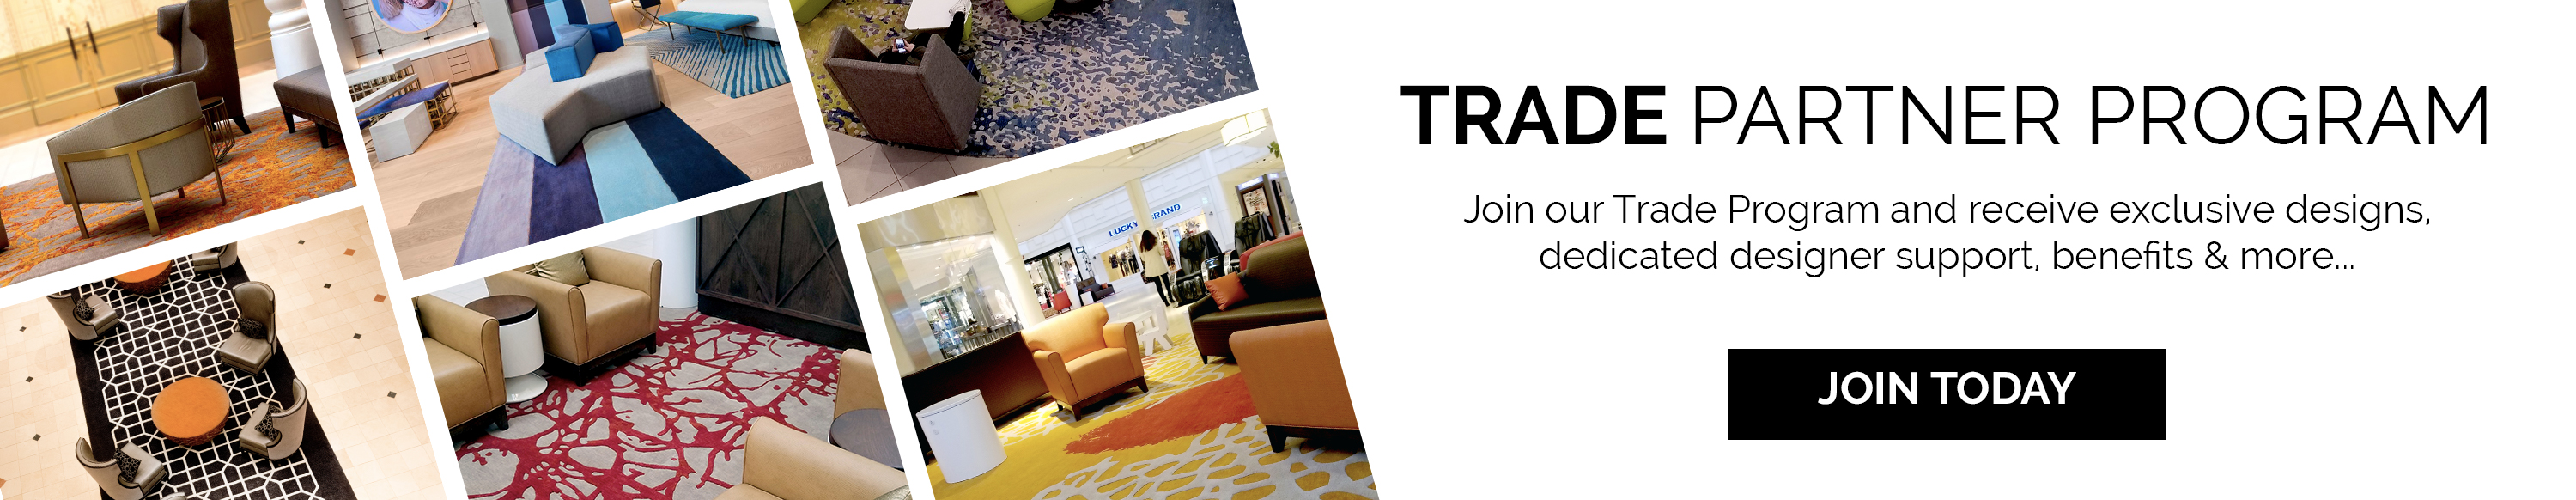 Trade partner program. Join our Trade Program and receive exclusive designs, dedicated designer support, benefits & more... Join today